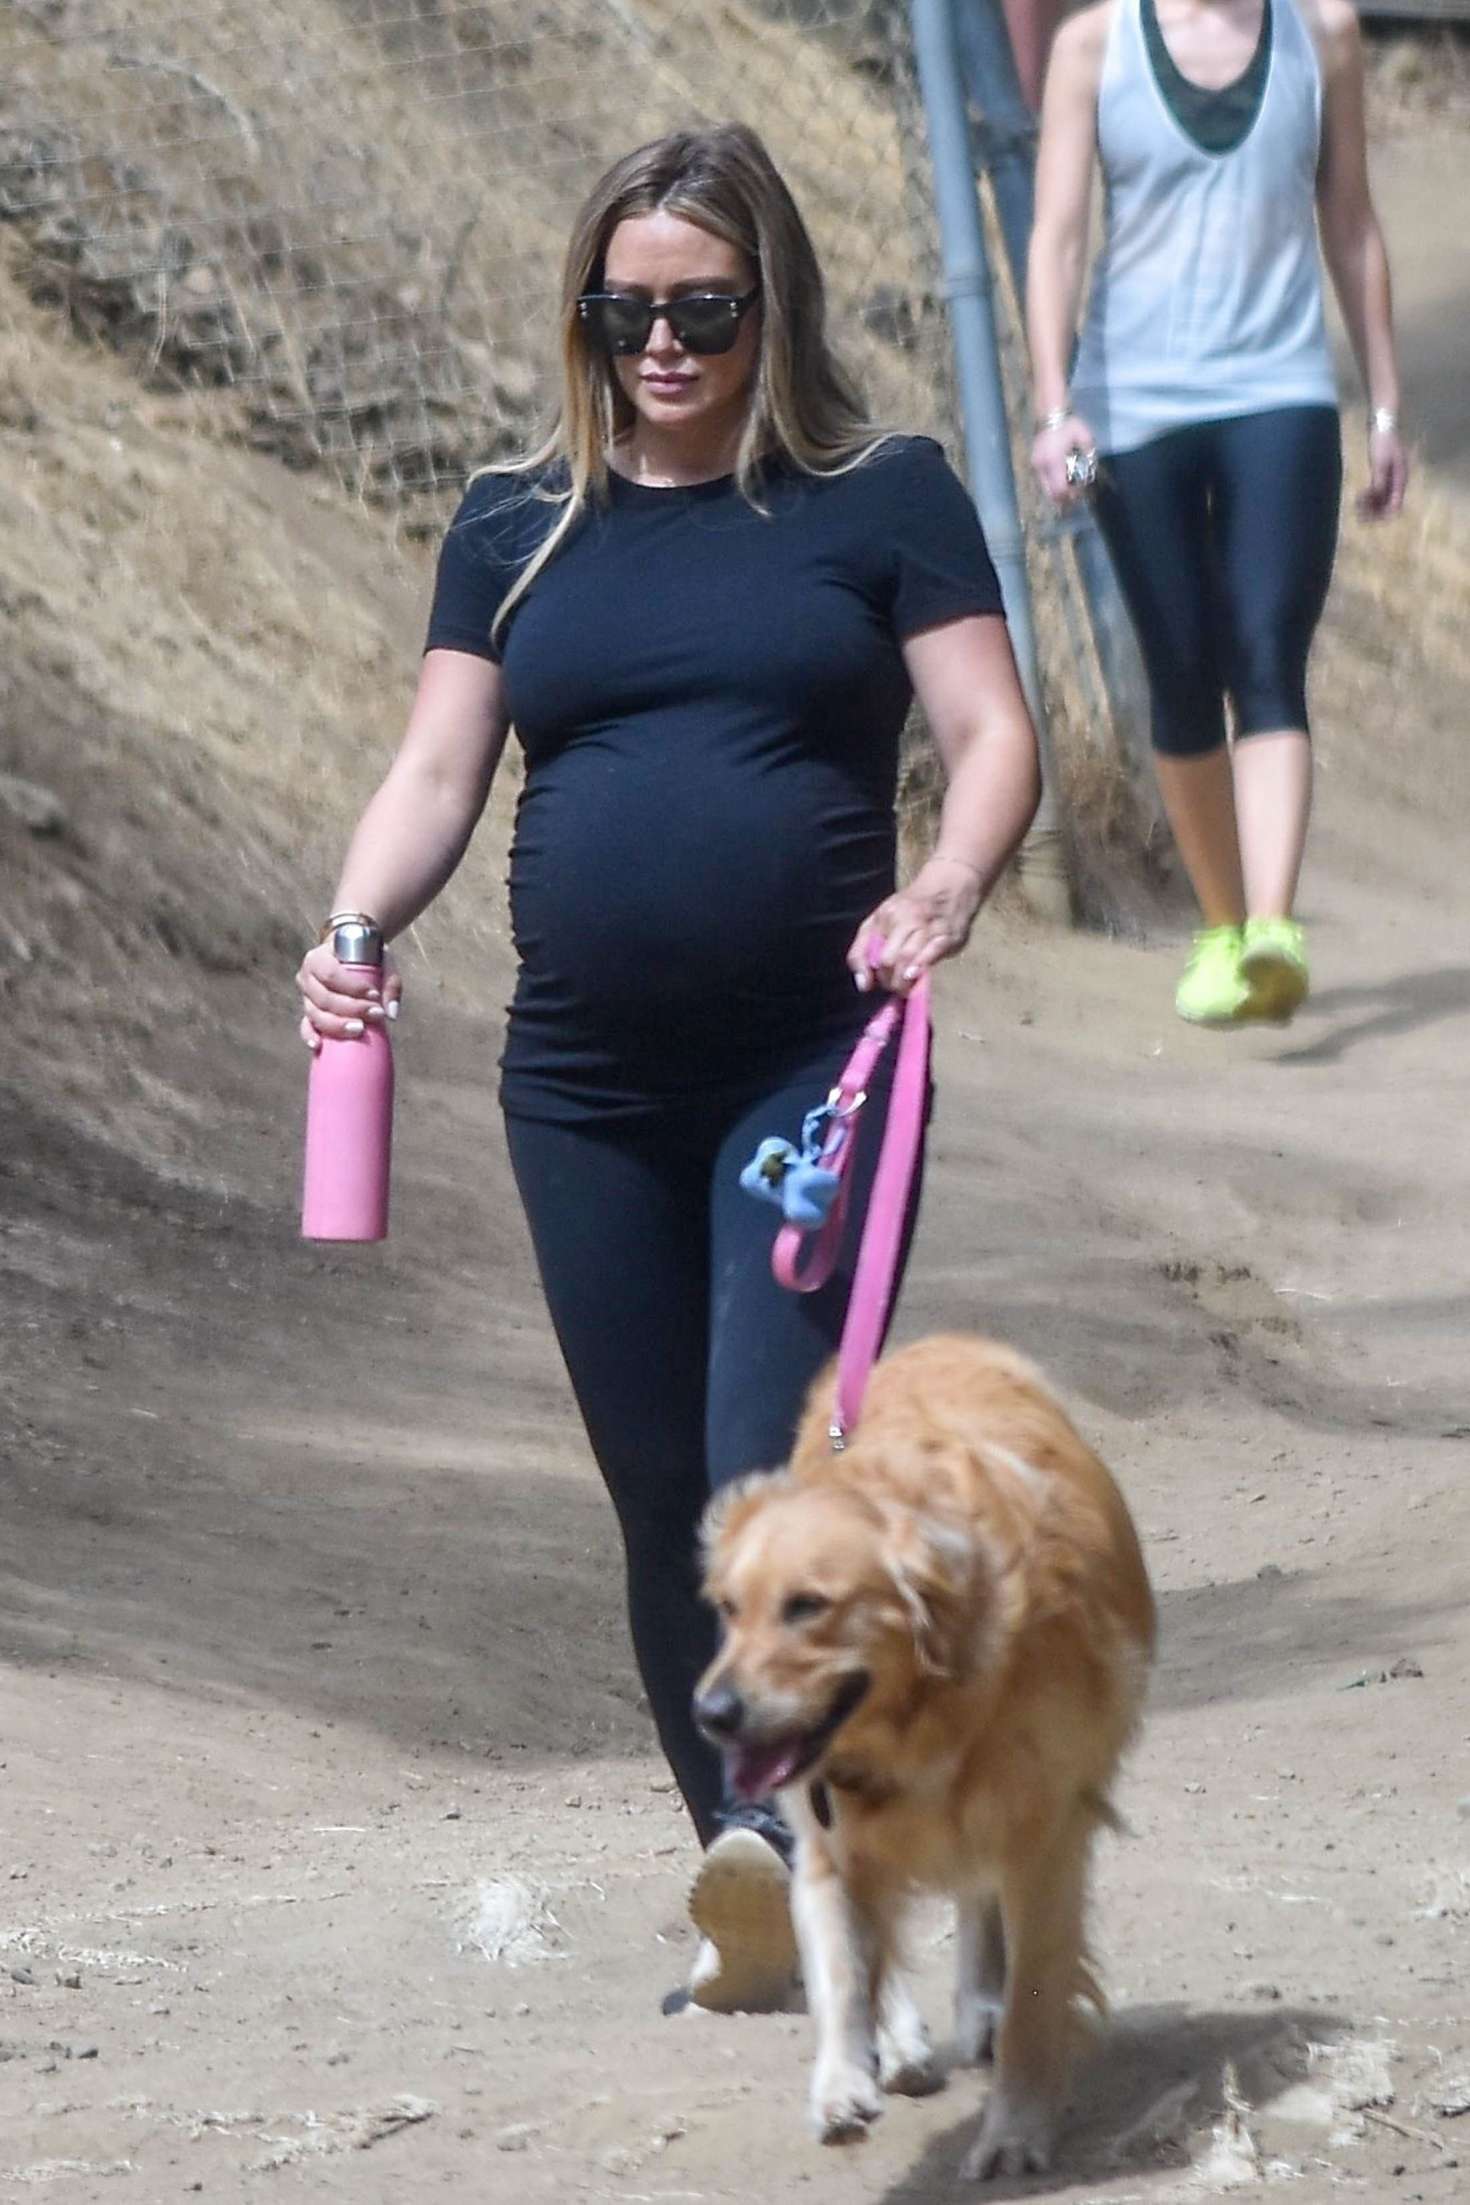 Hilary Duff with her dog out for a hike in Los Angeles